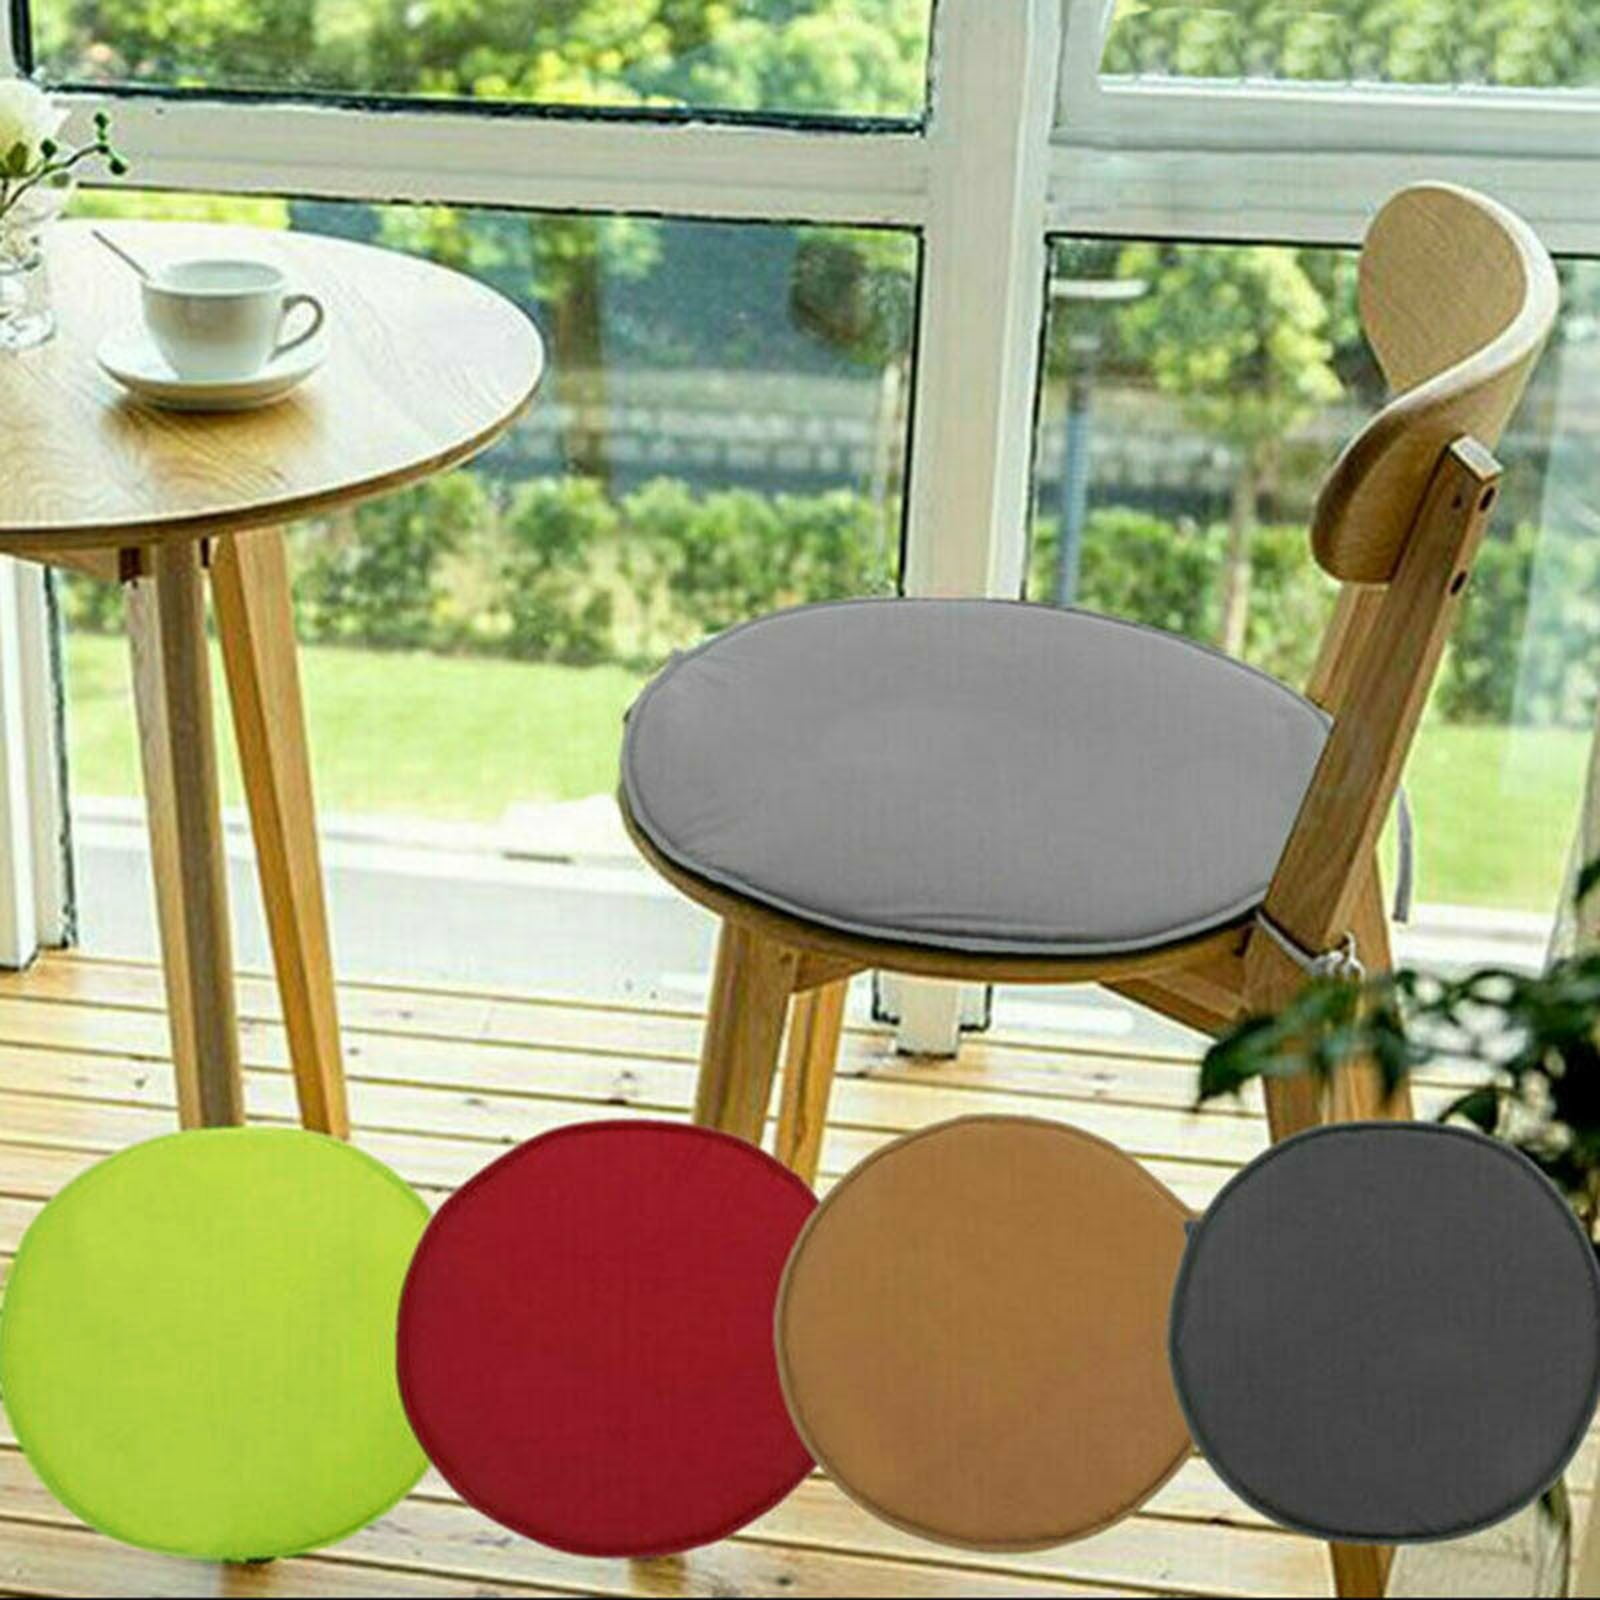 Details about   Tiita Round Cushion Floor Pillows Chair Cushions 22x22 Inch Outdoor Seating Pads 